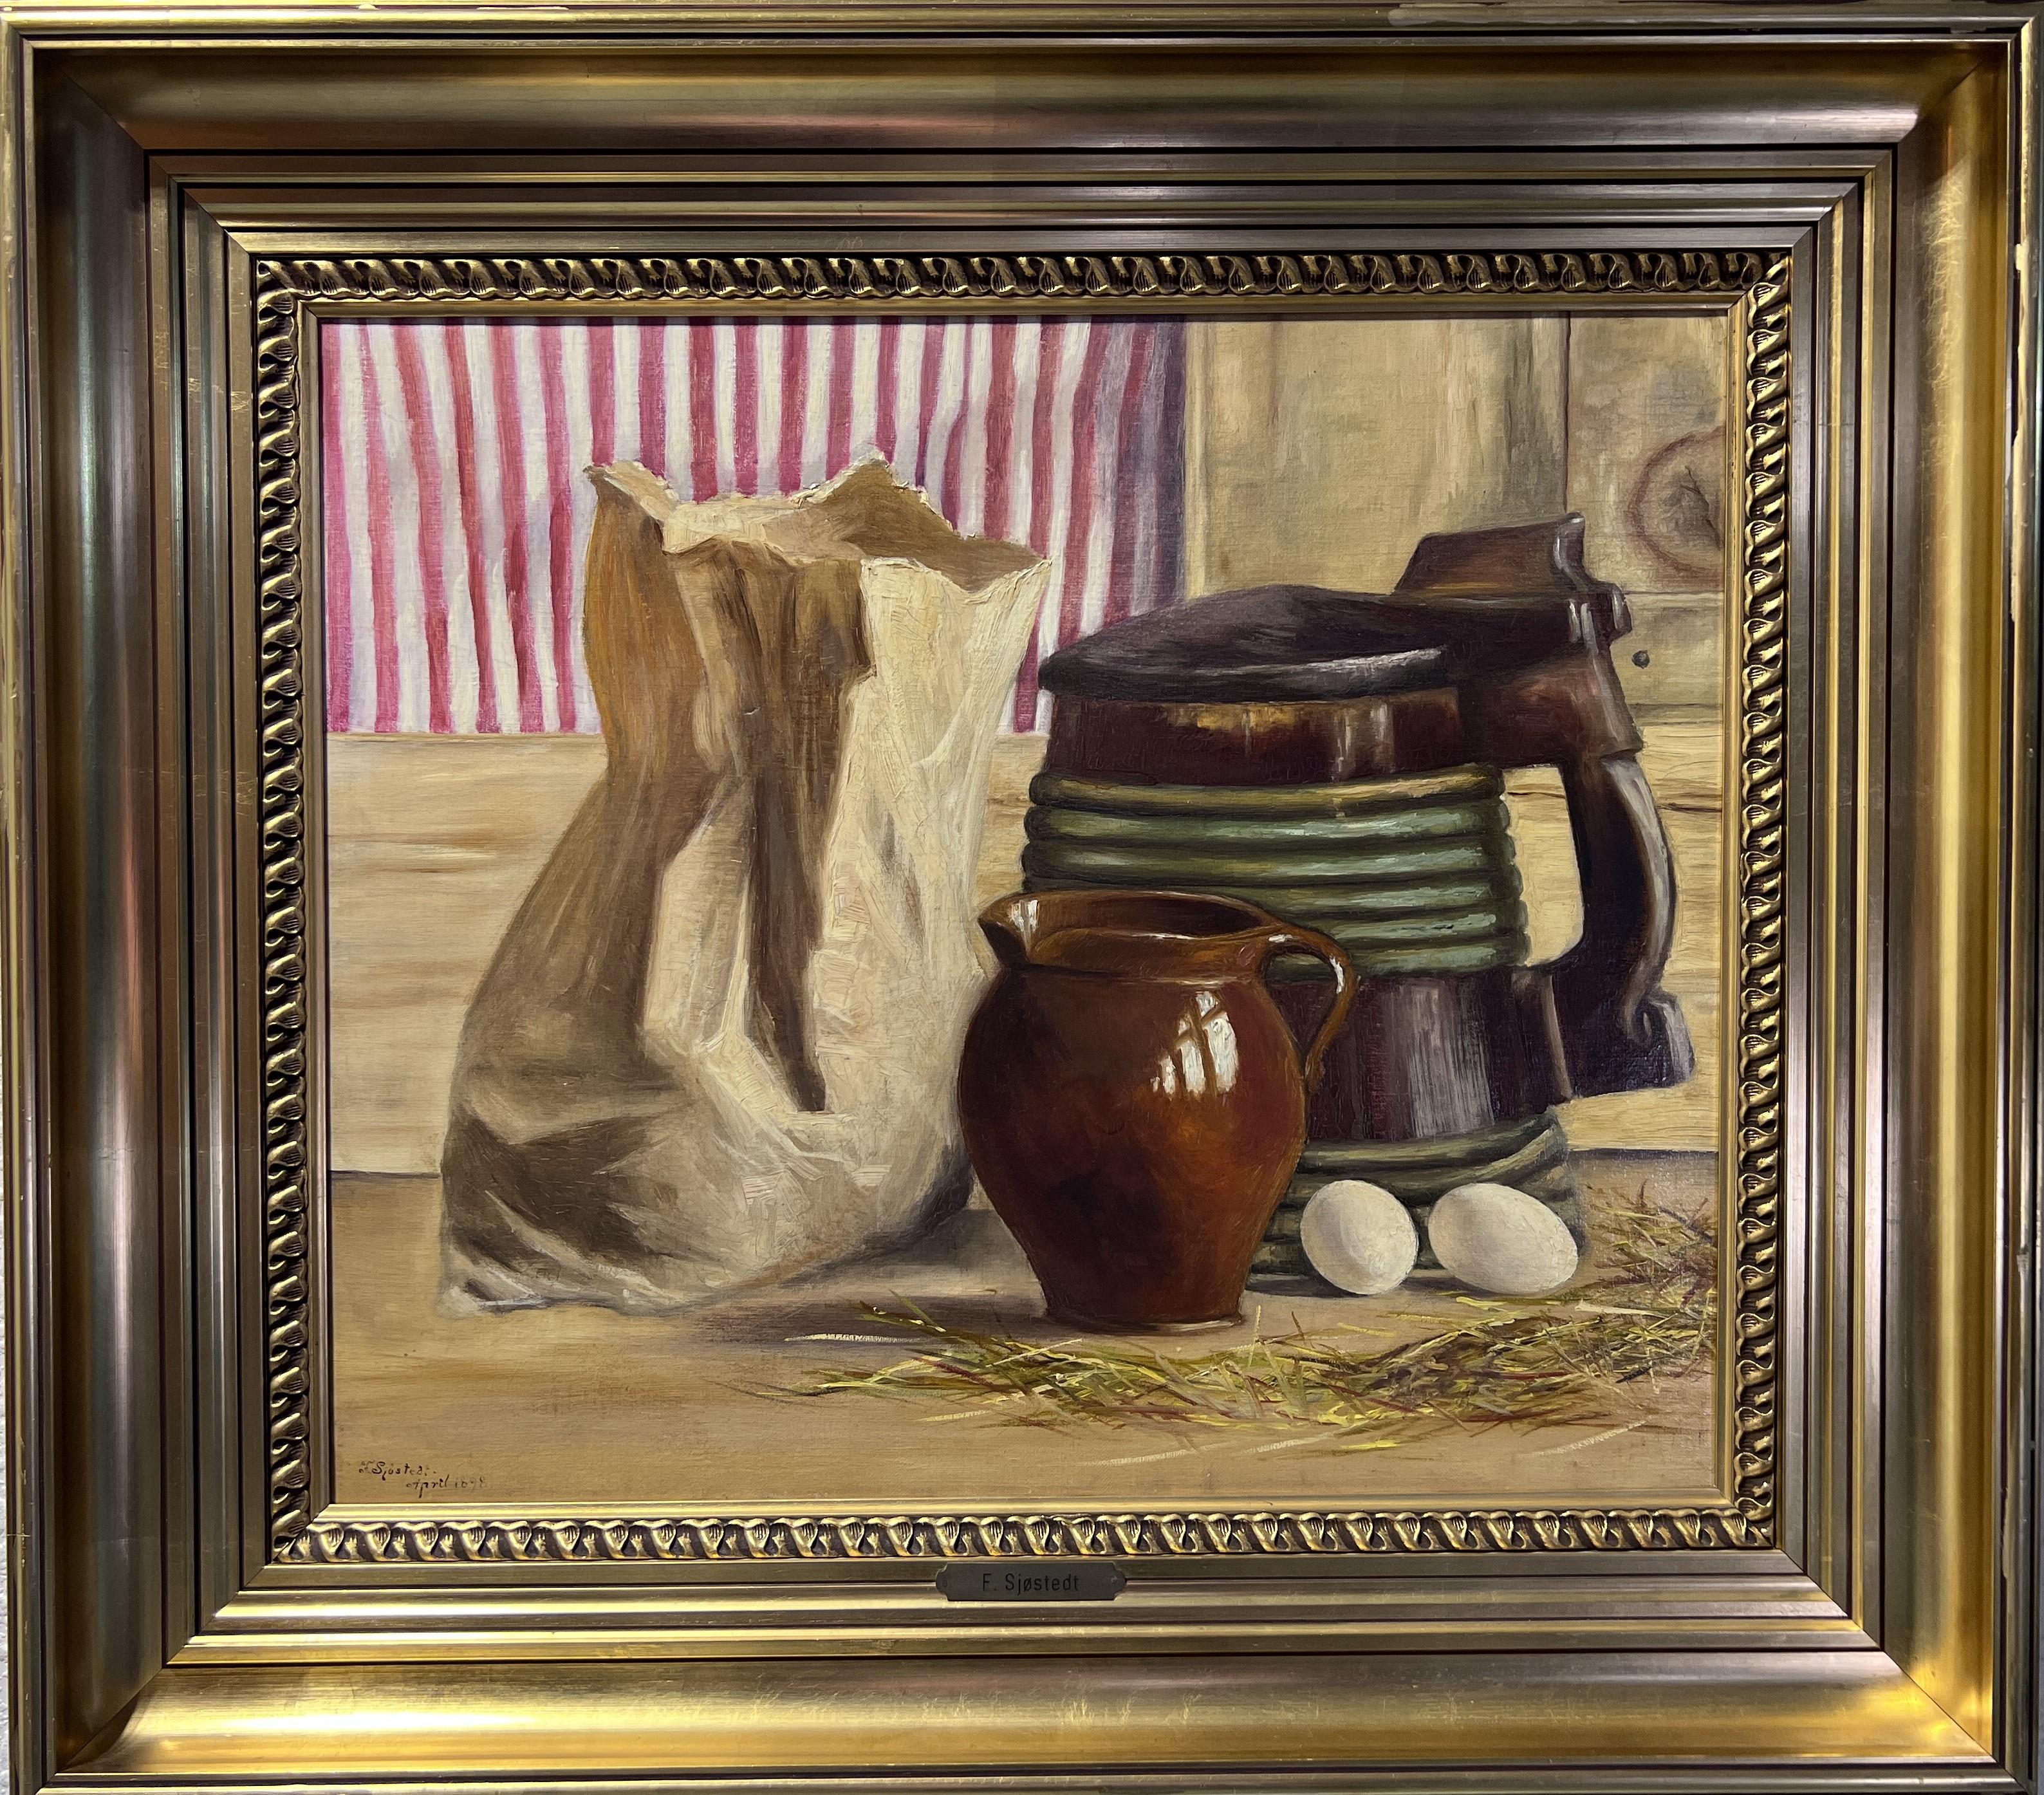 Up for sale is a beautiful antique oil painting on canvas by Scandinavian Artist F. SJOSTEDT The painting depicts a Still life composition.

Signed and dated in the lower-left corner F. SJOSTEDT 1898. 

Nicely framed. The nameplate is in the lower